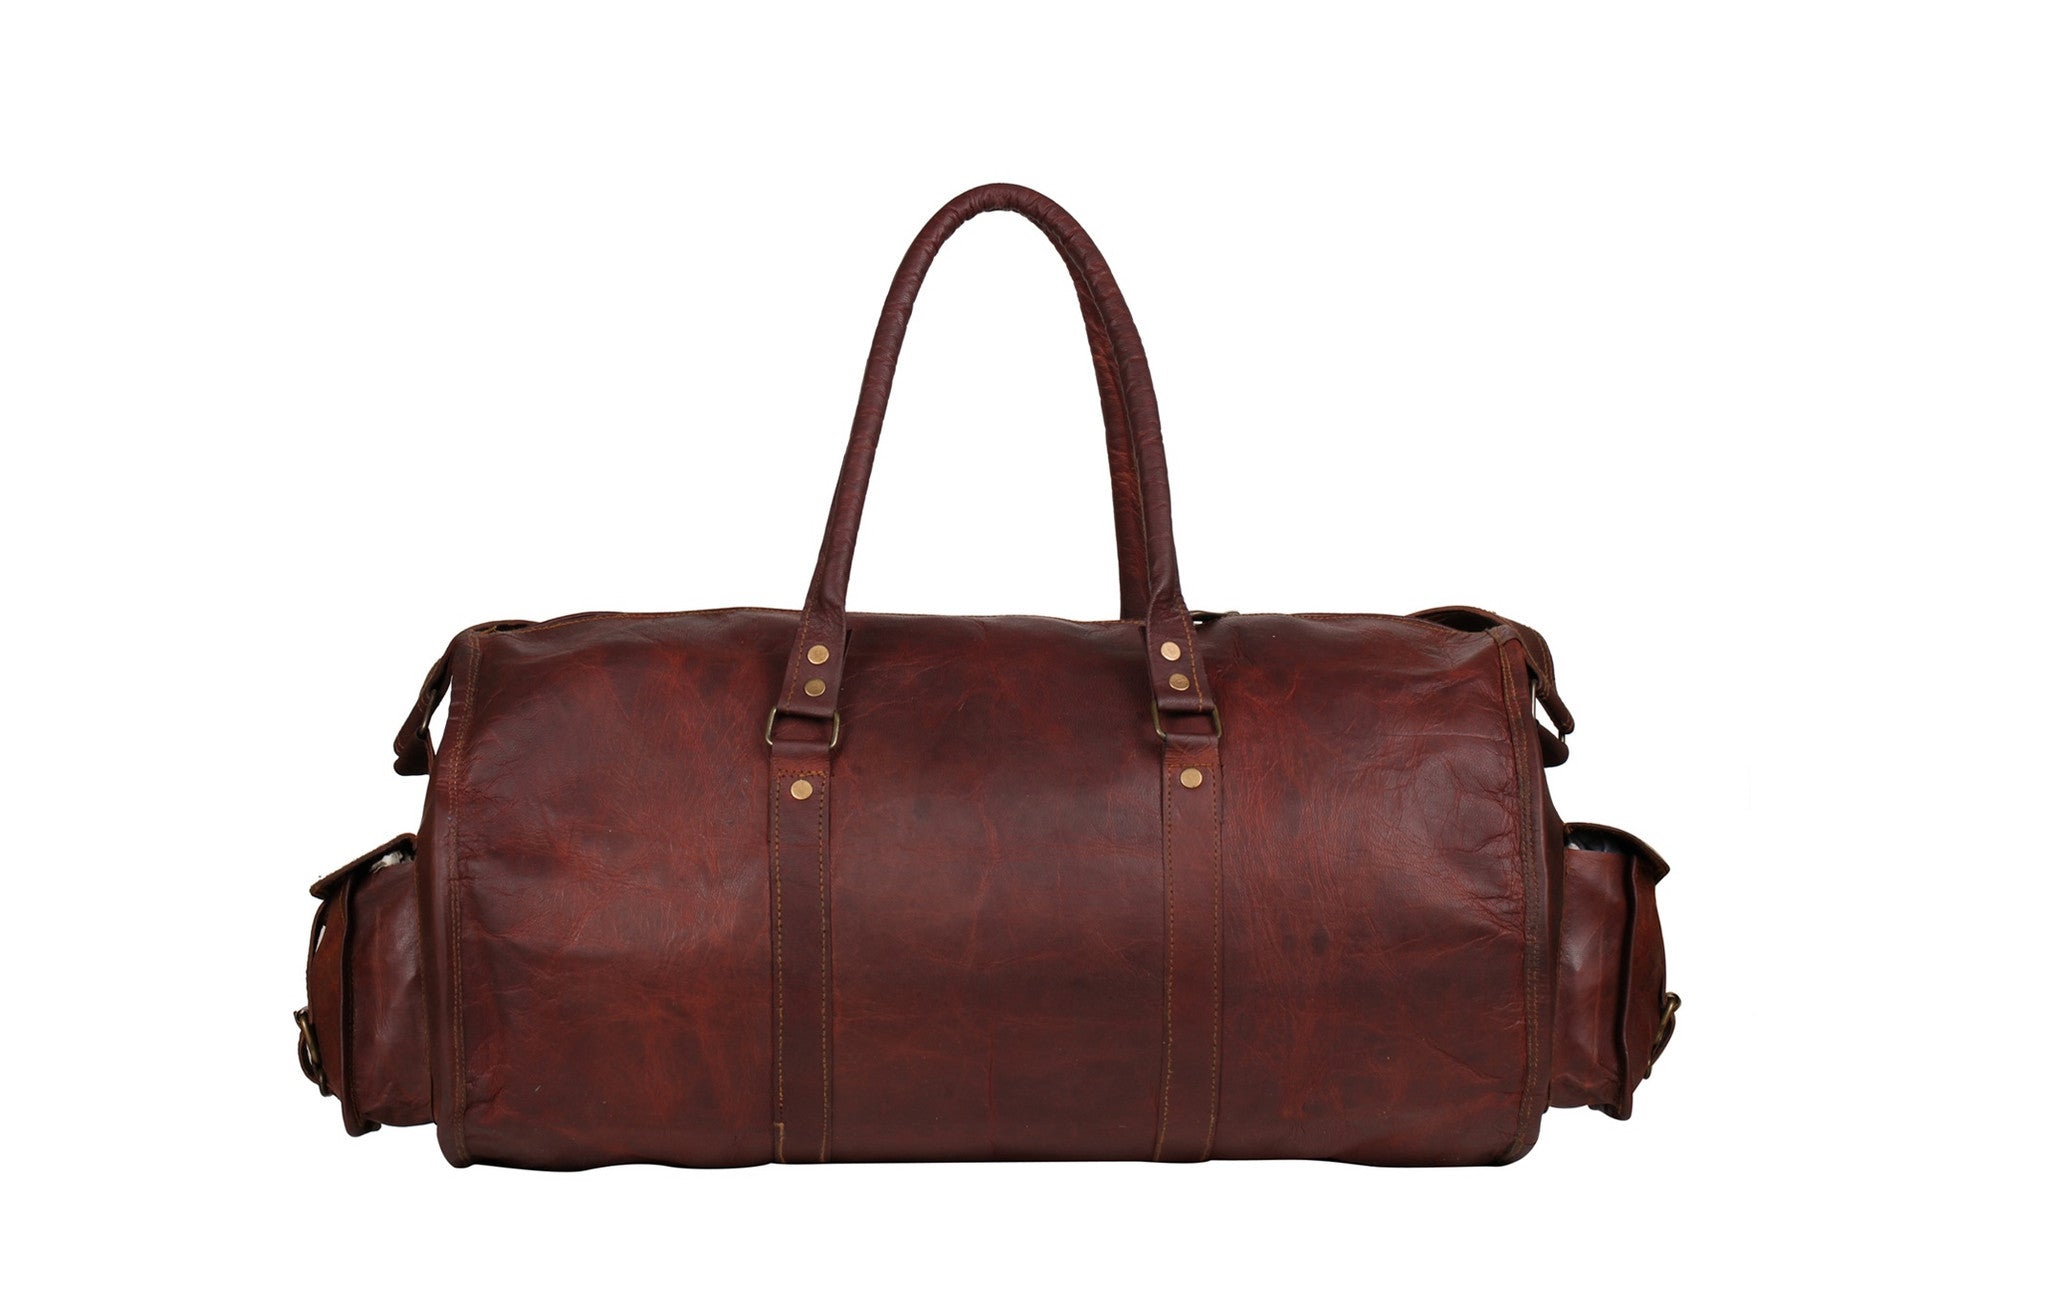 Indiana Jones Style Bags | High On Leather